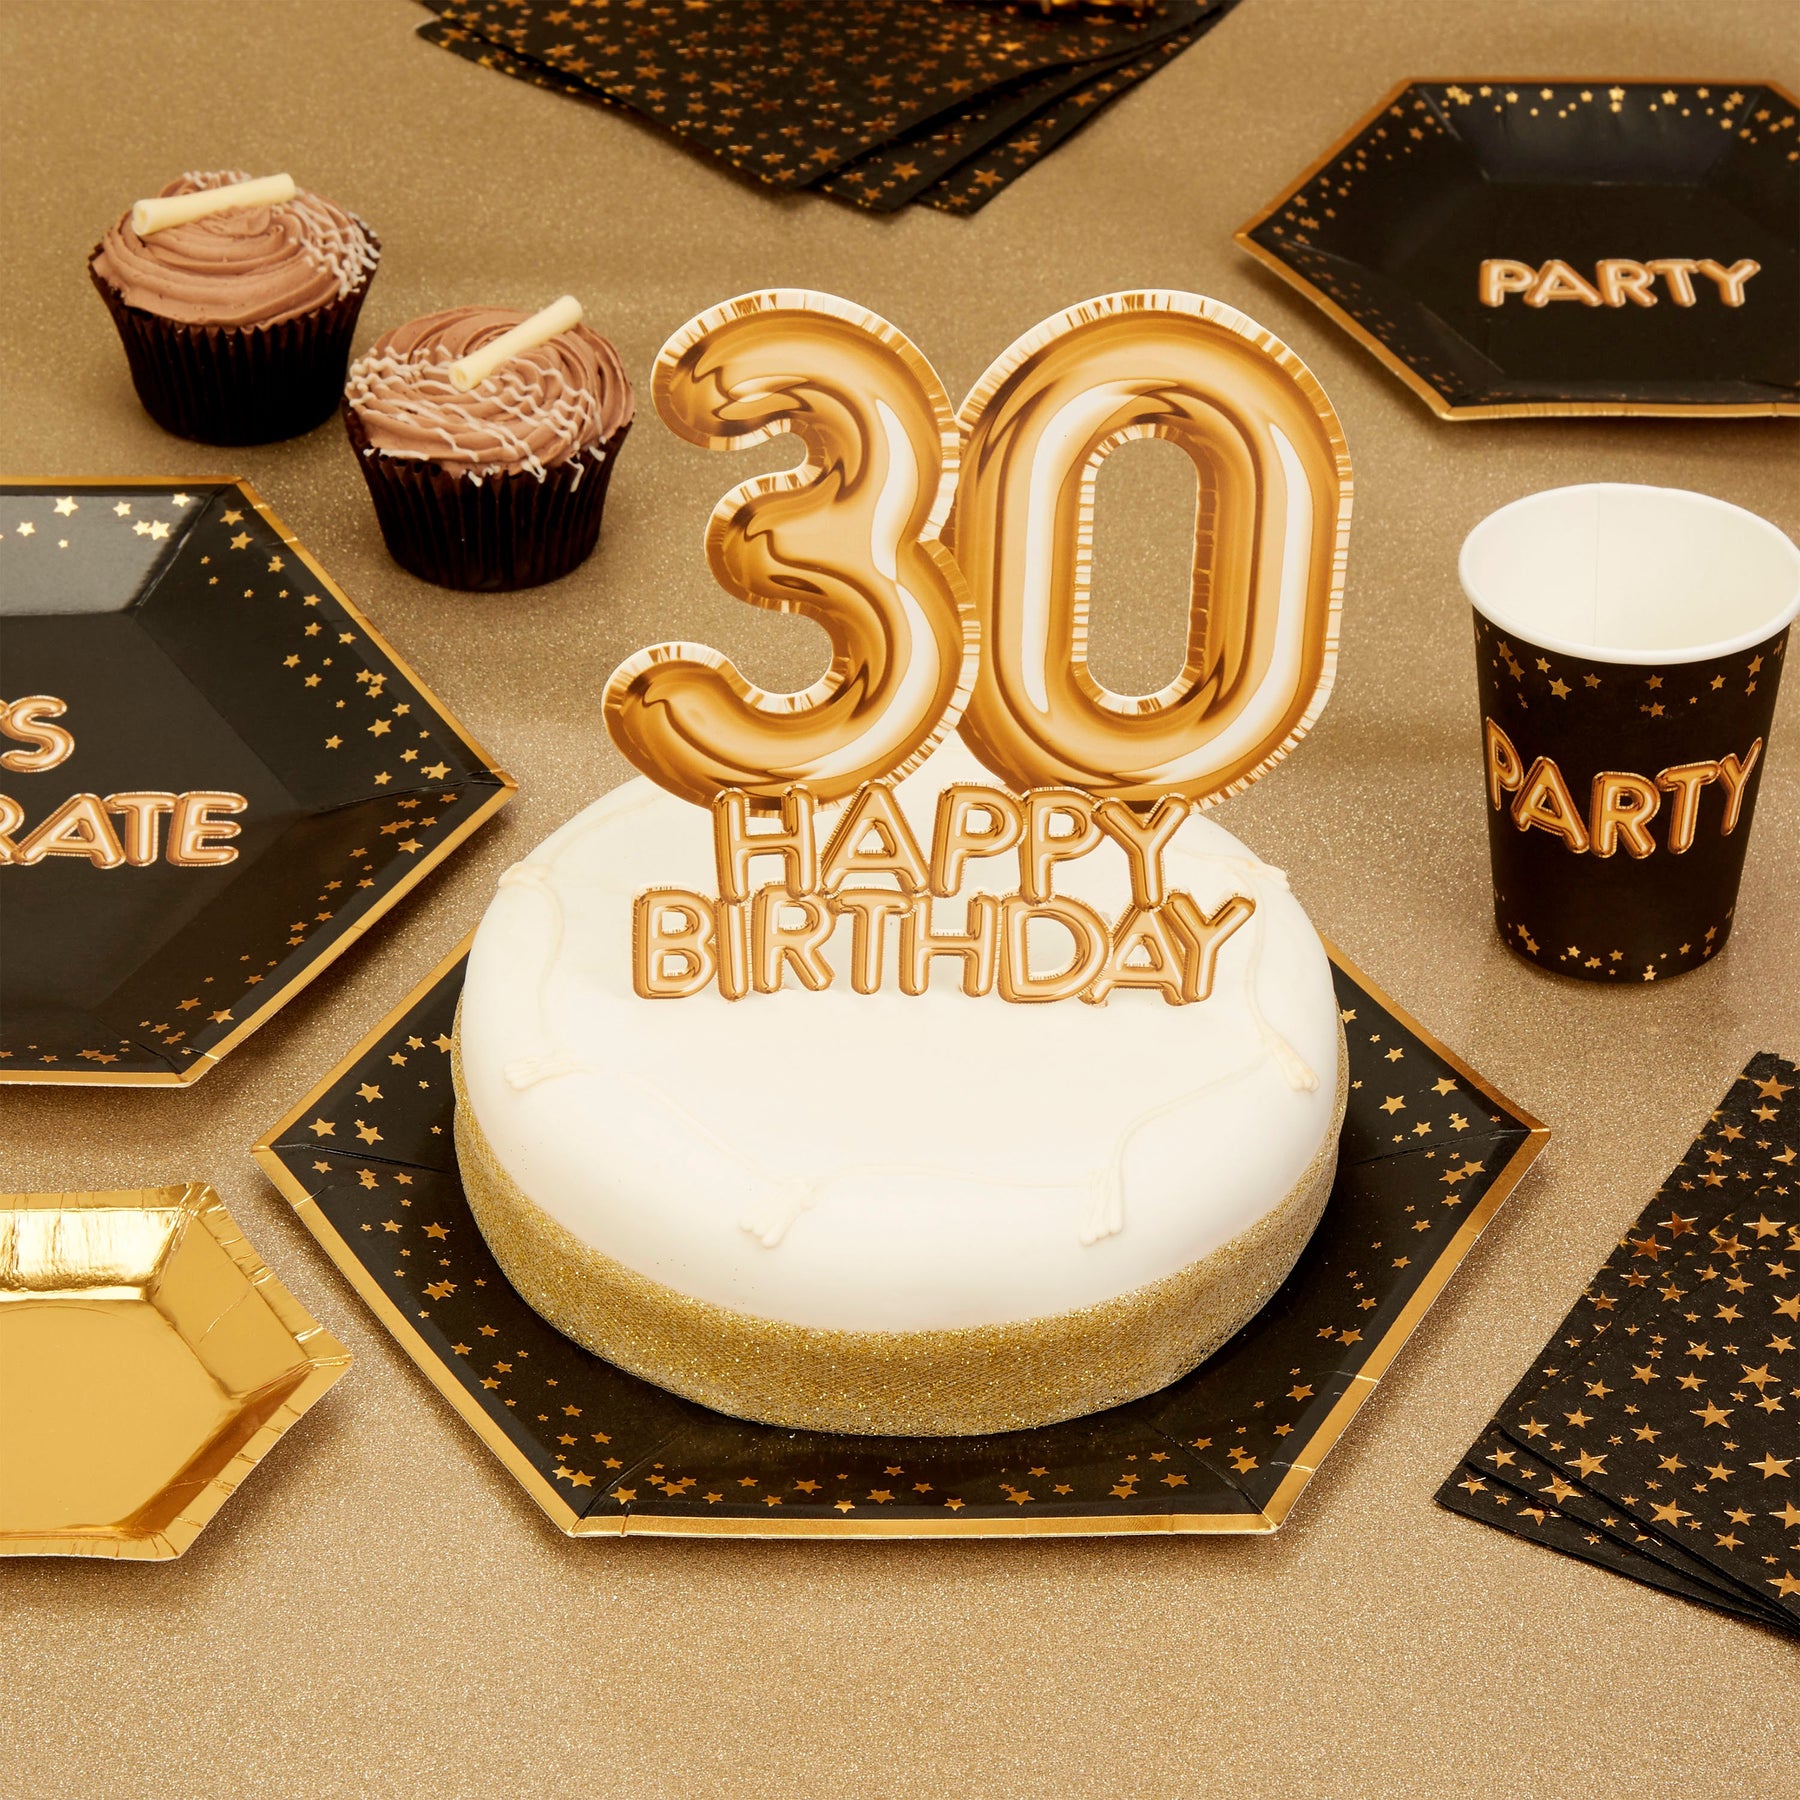 30th Birthday Cake Ideas: 50 Spectacular Cake Designs For Her & Him